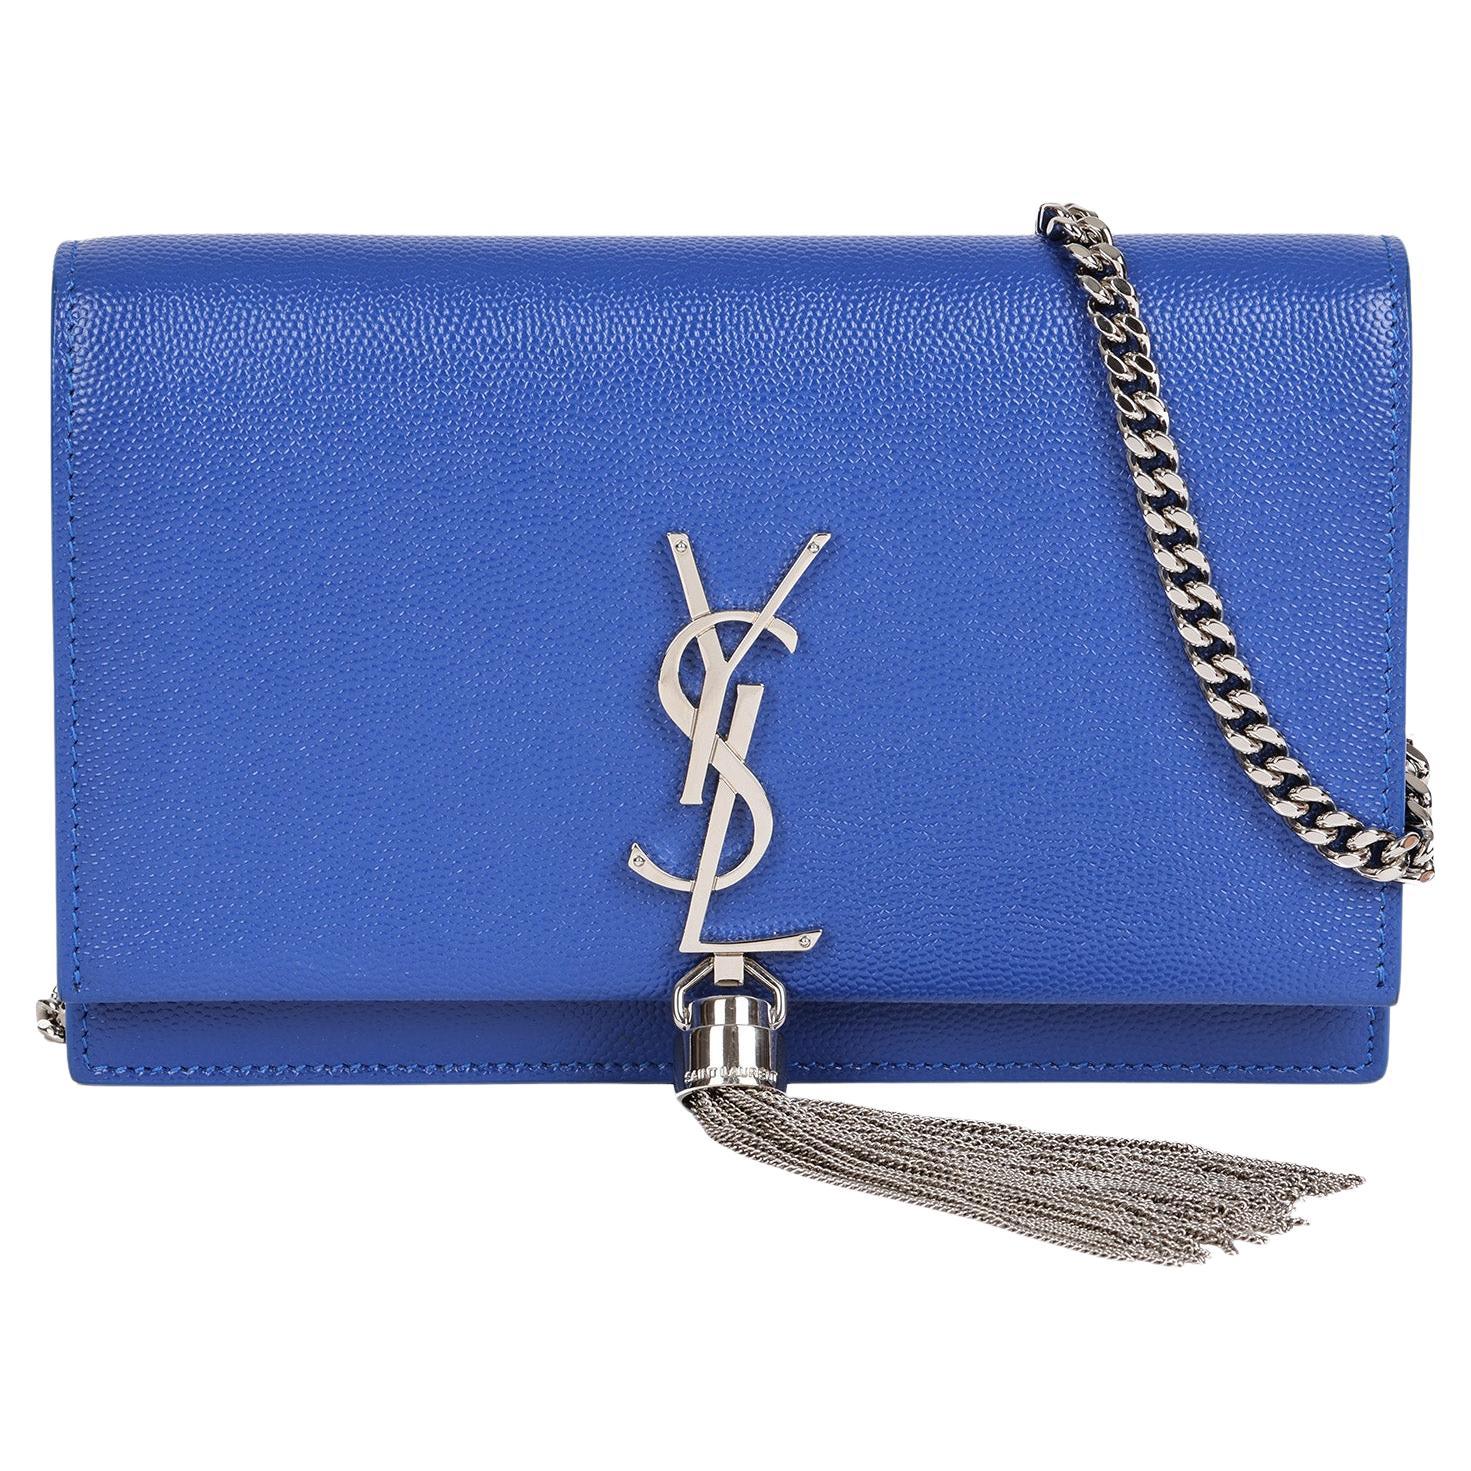 SAINT LAURENT Blue Electric Calfskin Leather Kate Chain Wallet with Tassel